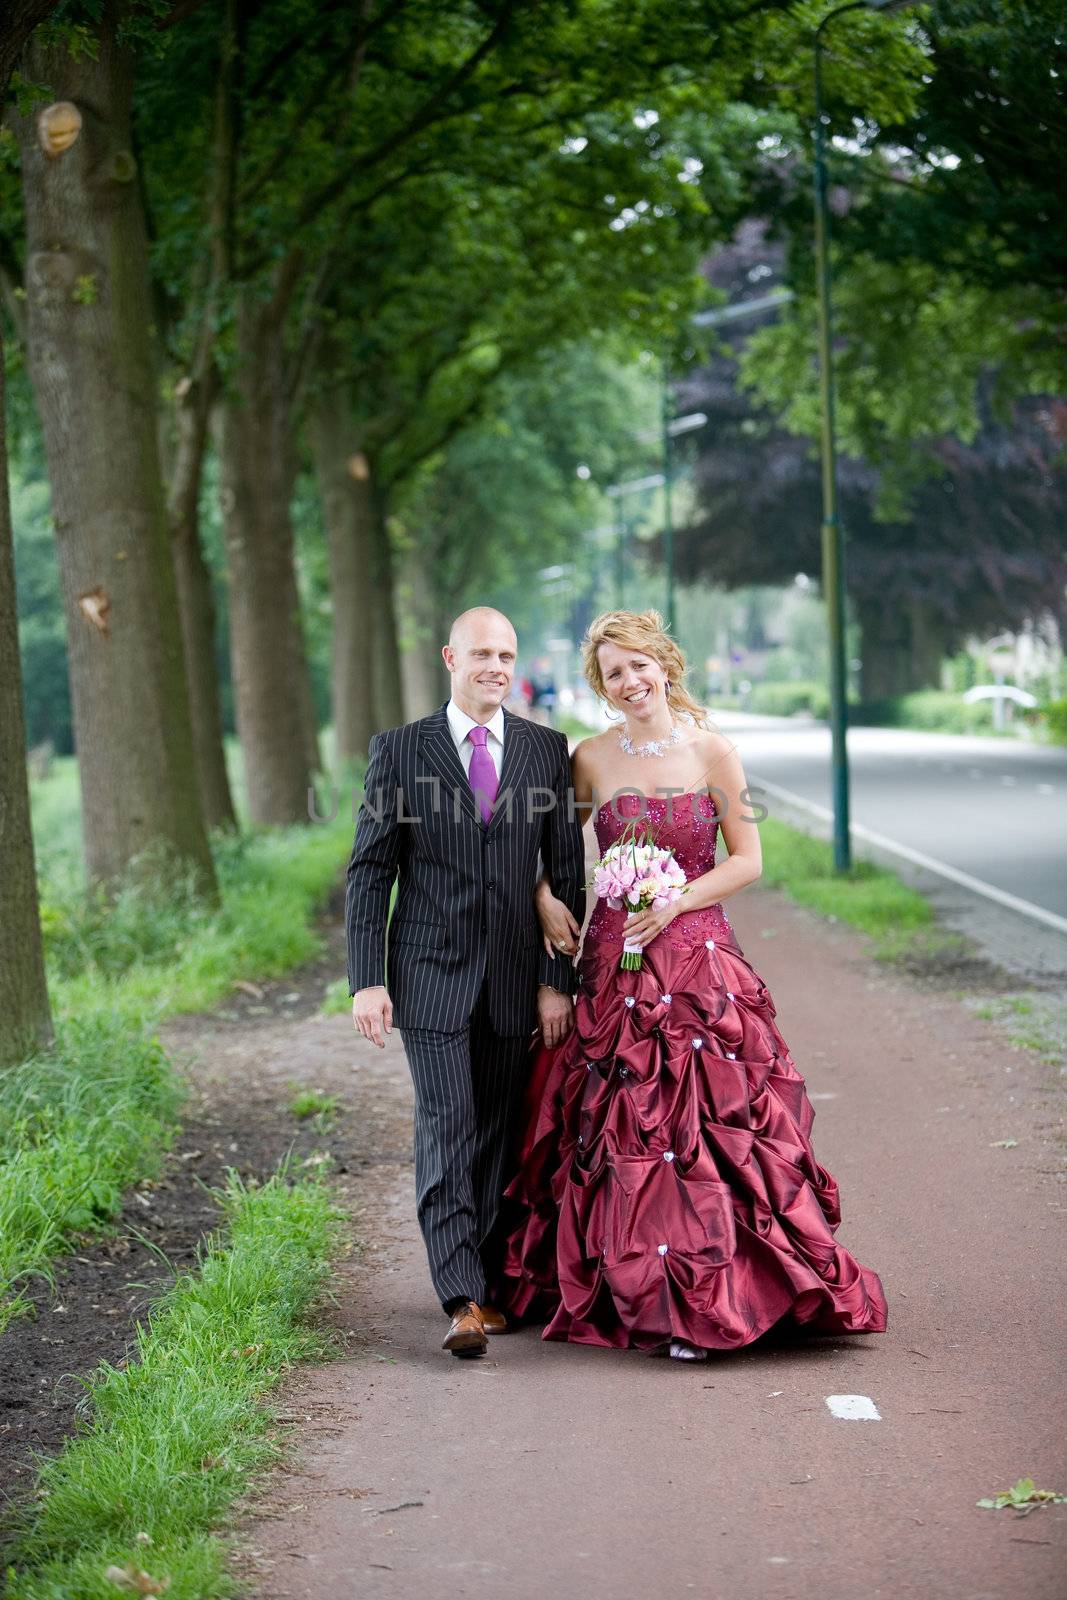 Pretty bridal couple walking together outdoors